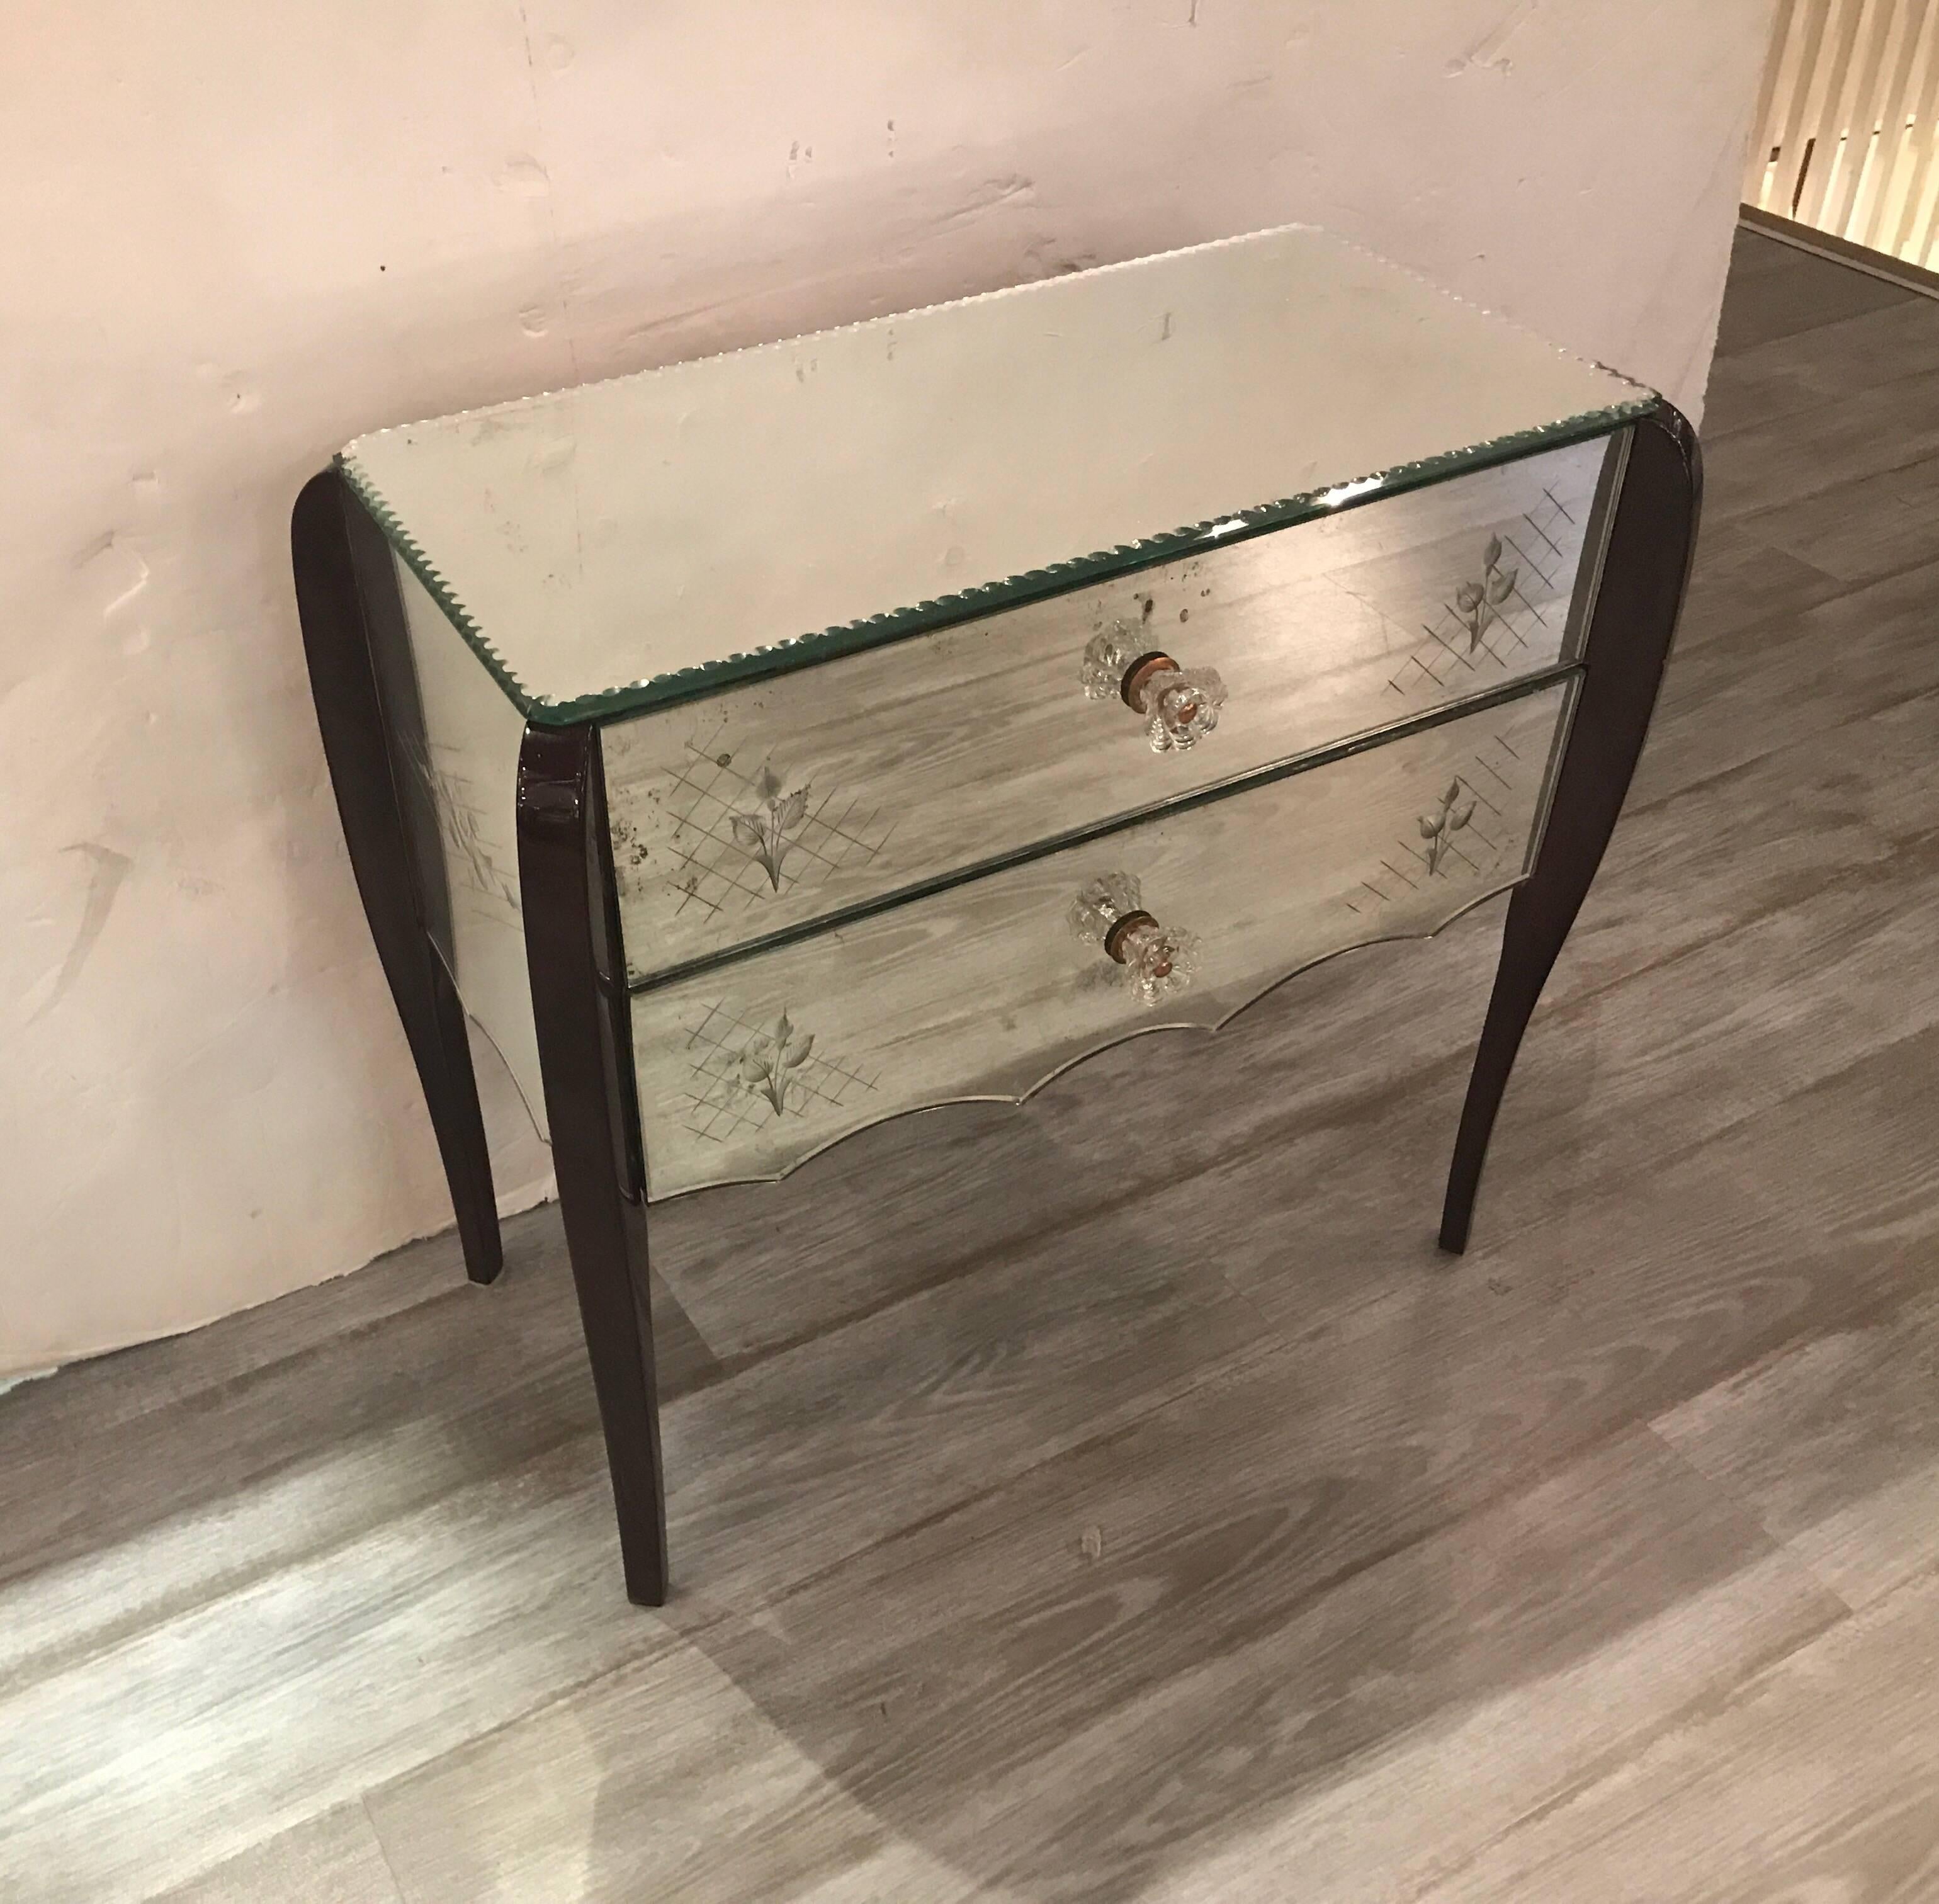 Sophisticated pair of mirrored art deco nightstands with drawers. The sleek mahogany legs with mirrored tops, sides and fronts, the sides and front with delicate etched mirrors. All original with some slight dark spots. The tops with textured nipped